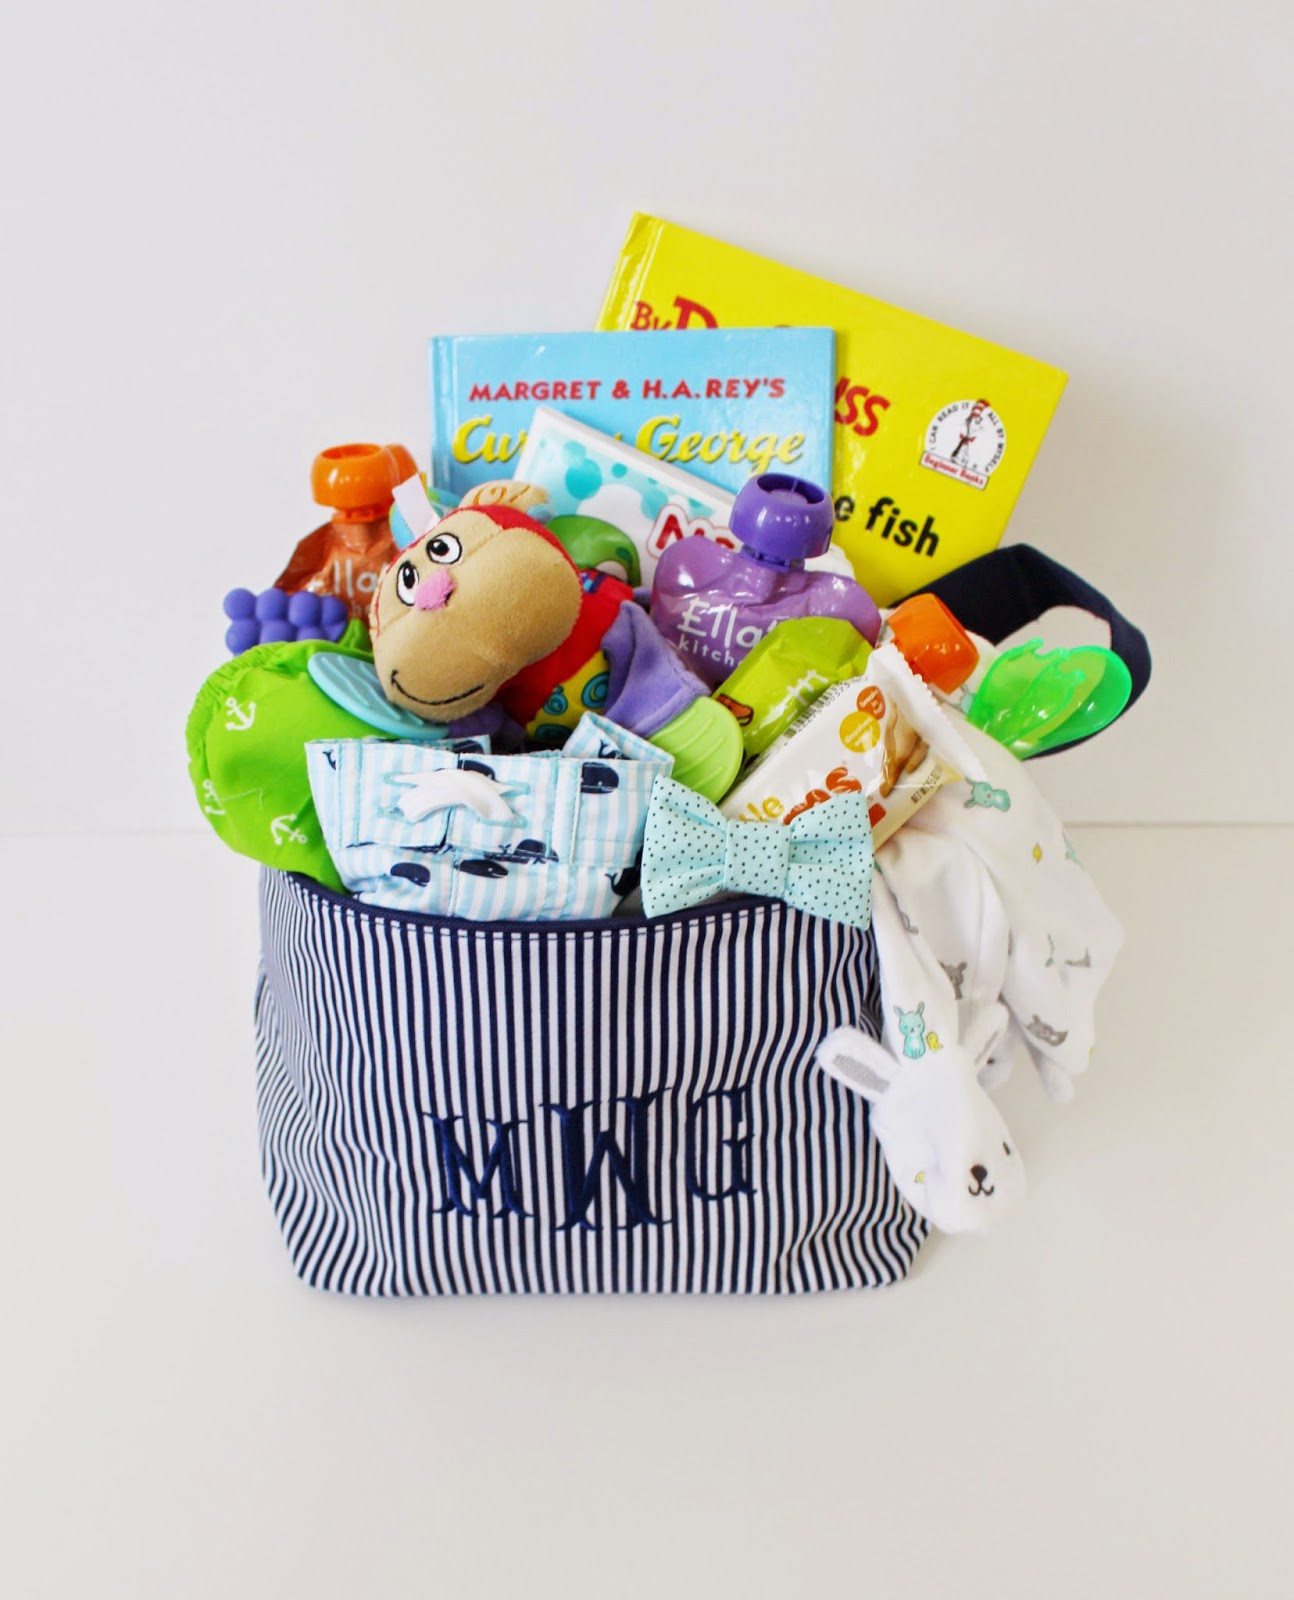 Easter Basket Ideas For 9 Year Old Boy
 Baby s First Easter Basket